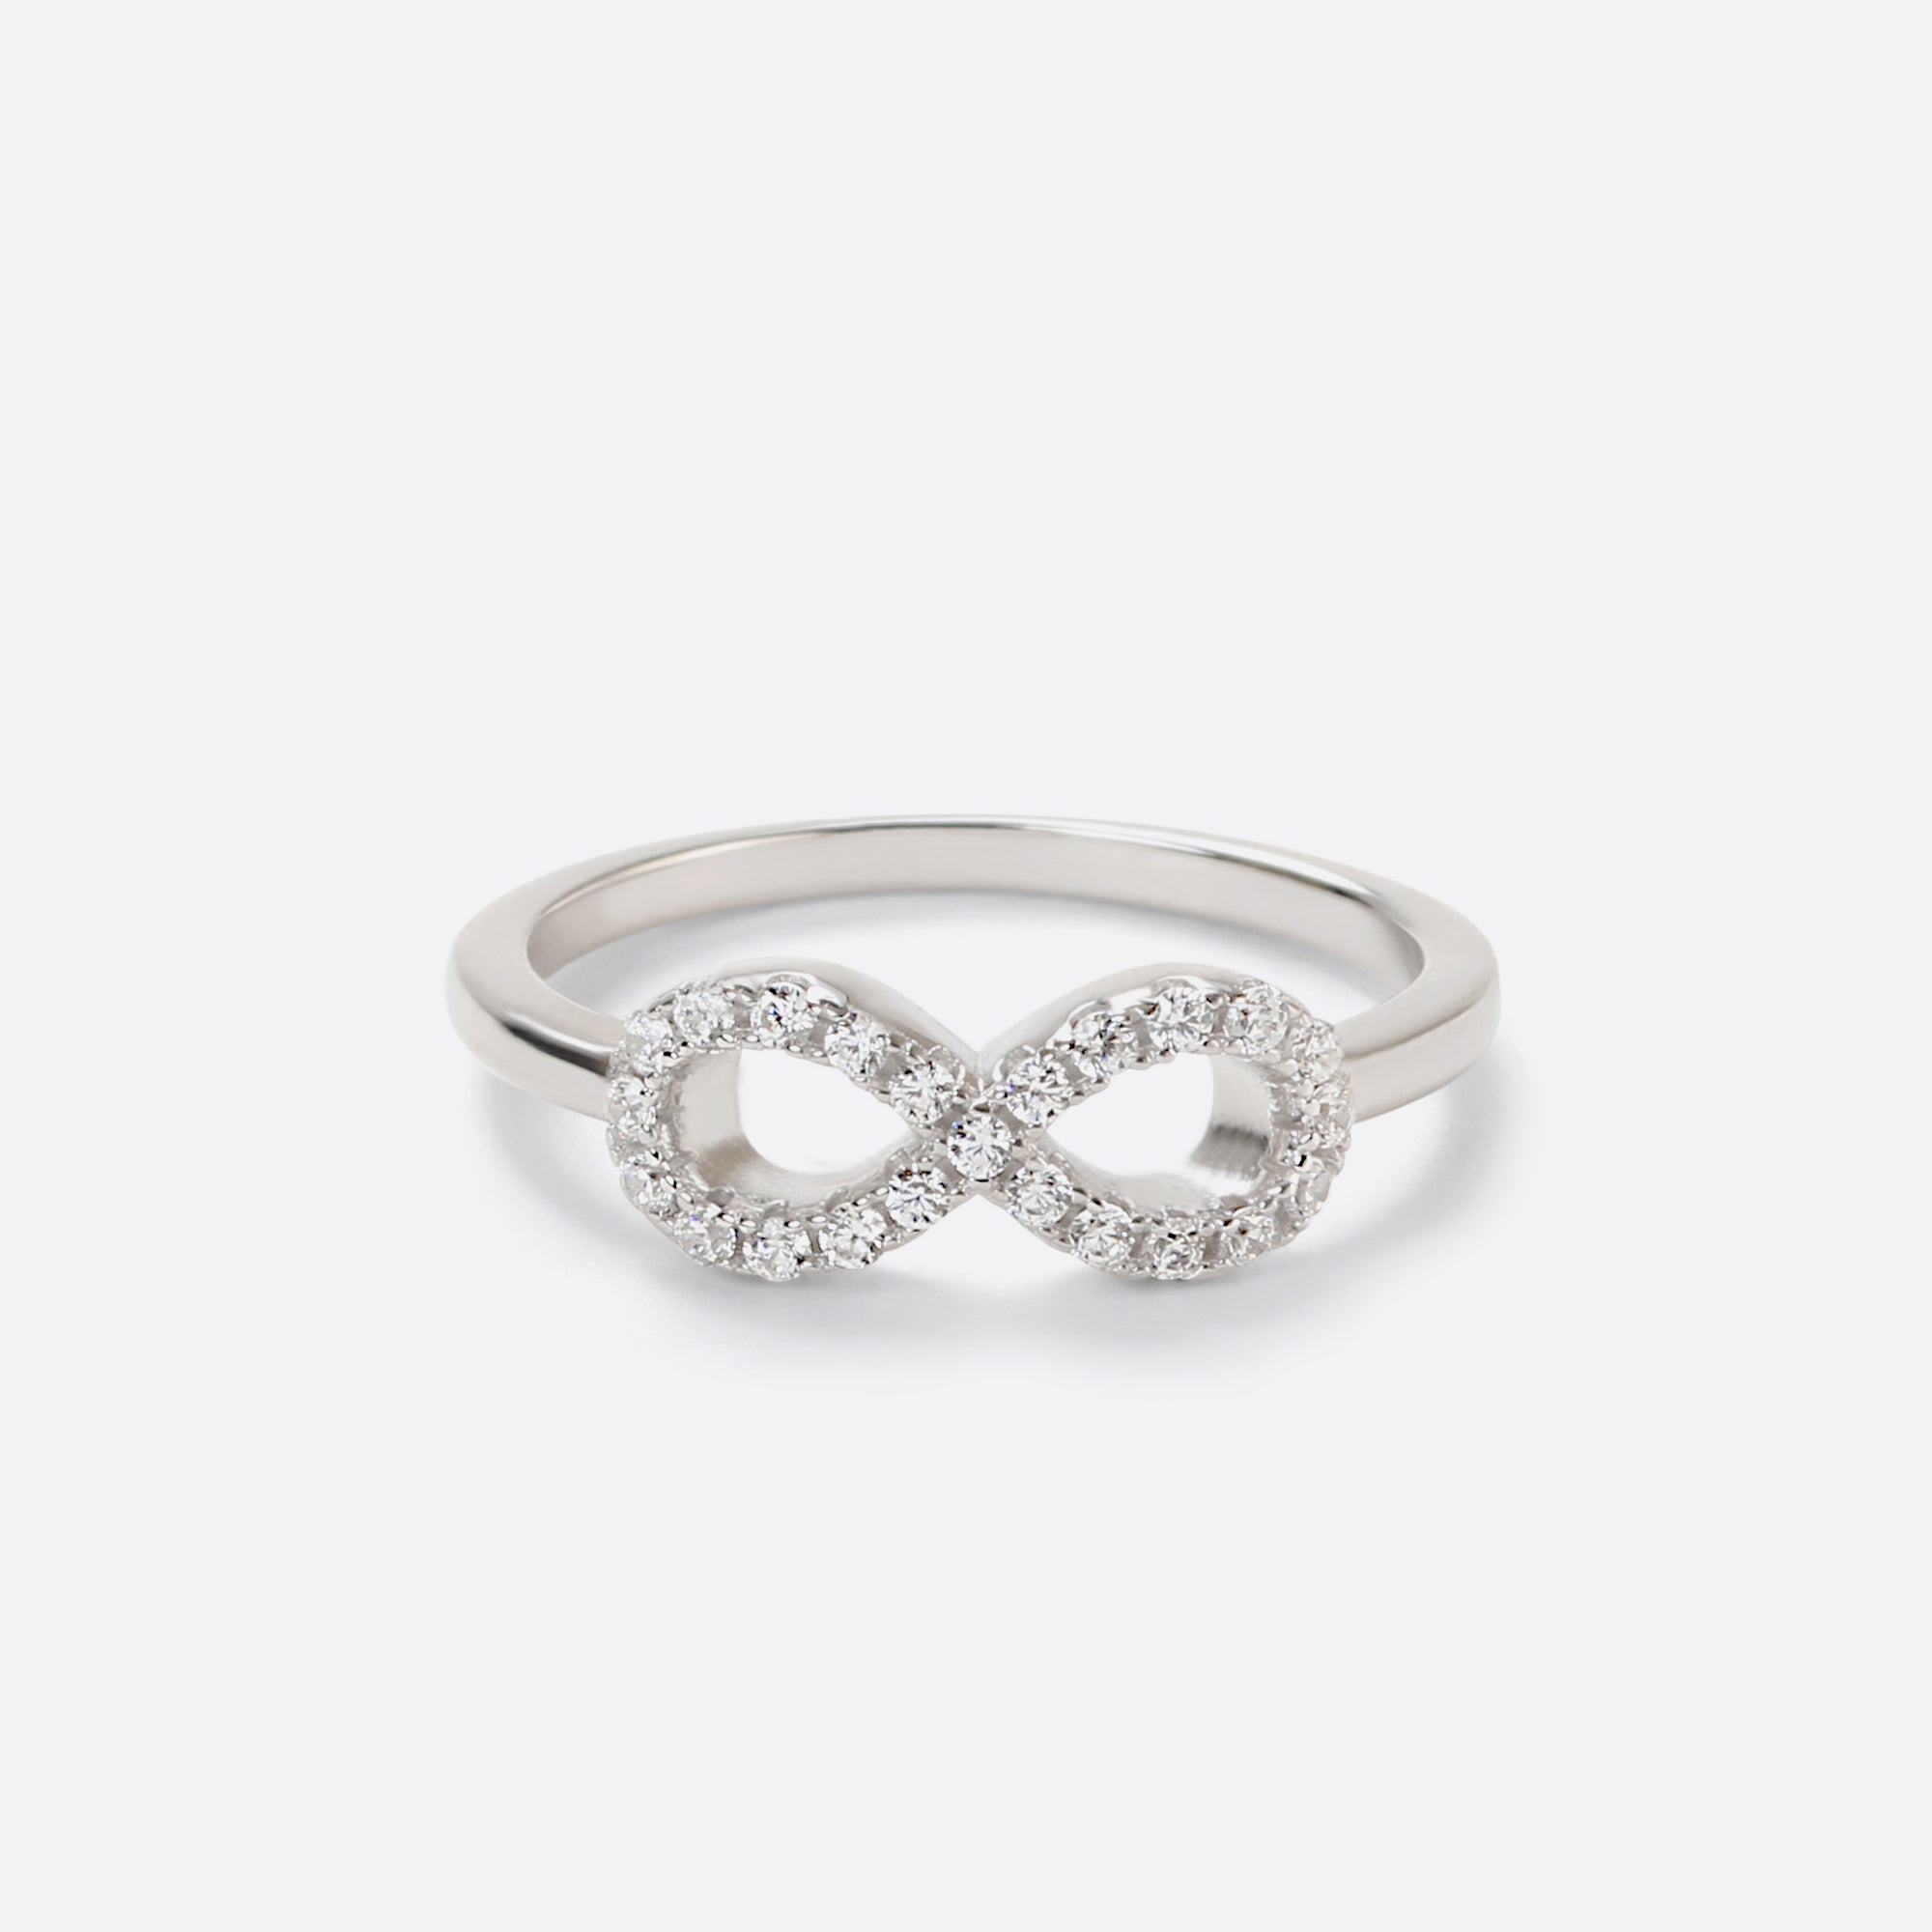 Infinity ring with cz, sterling silver